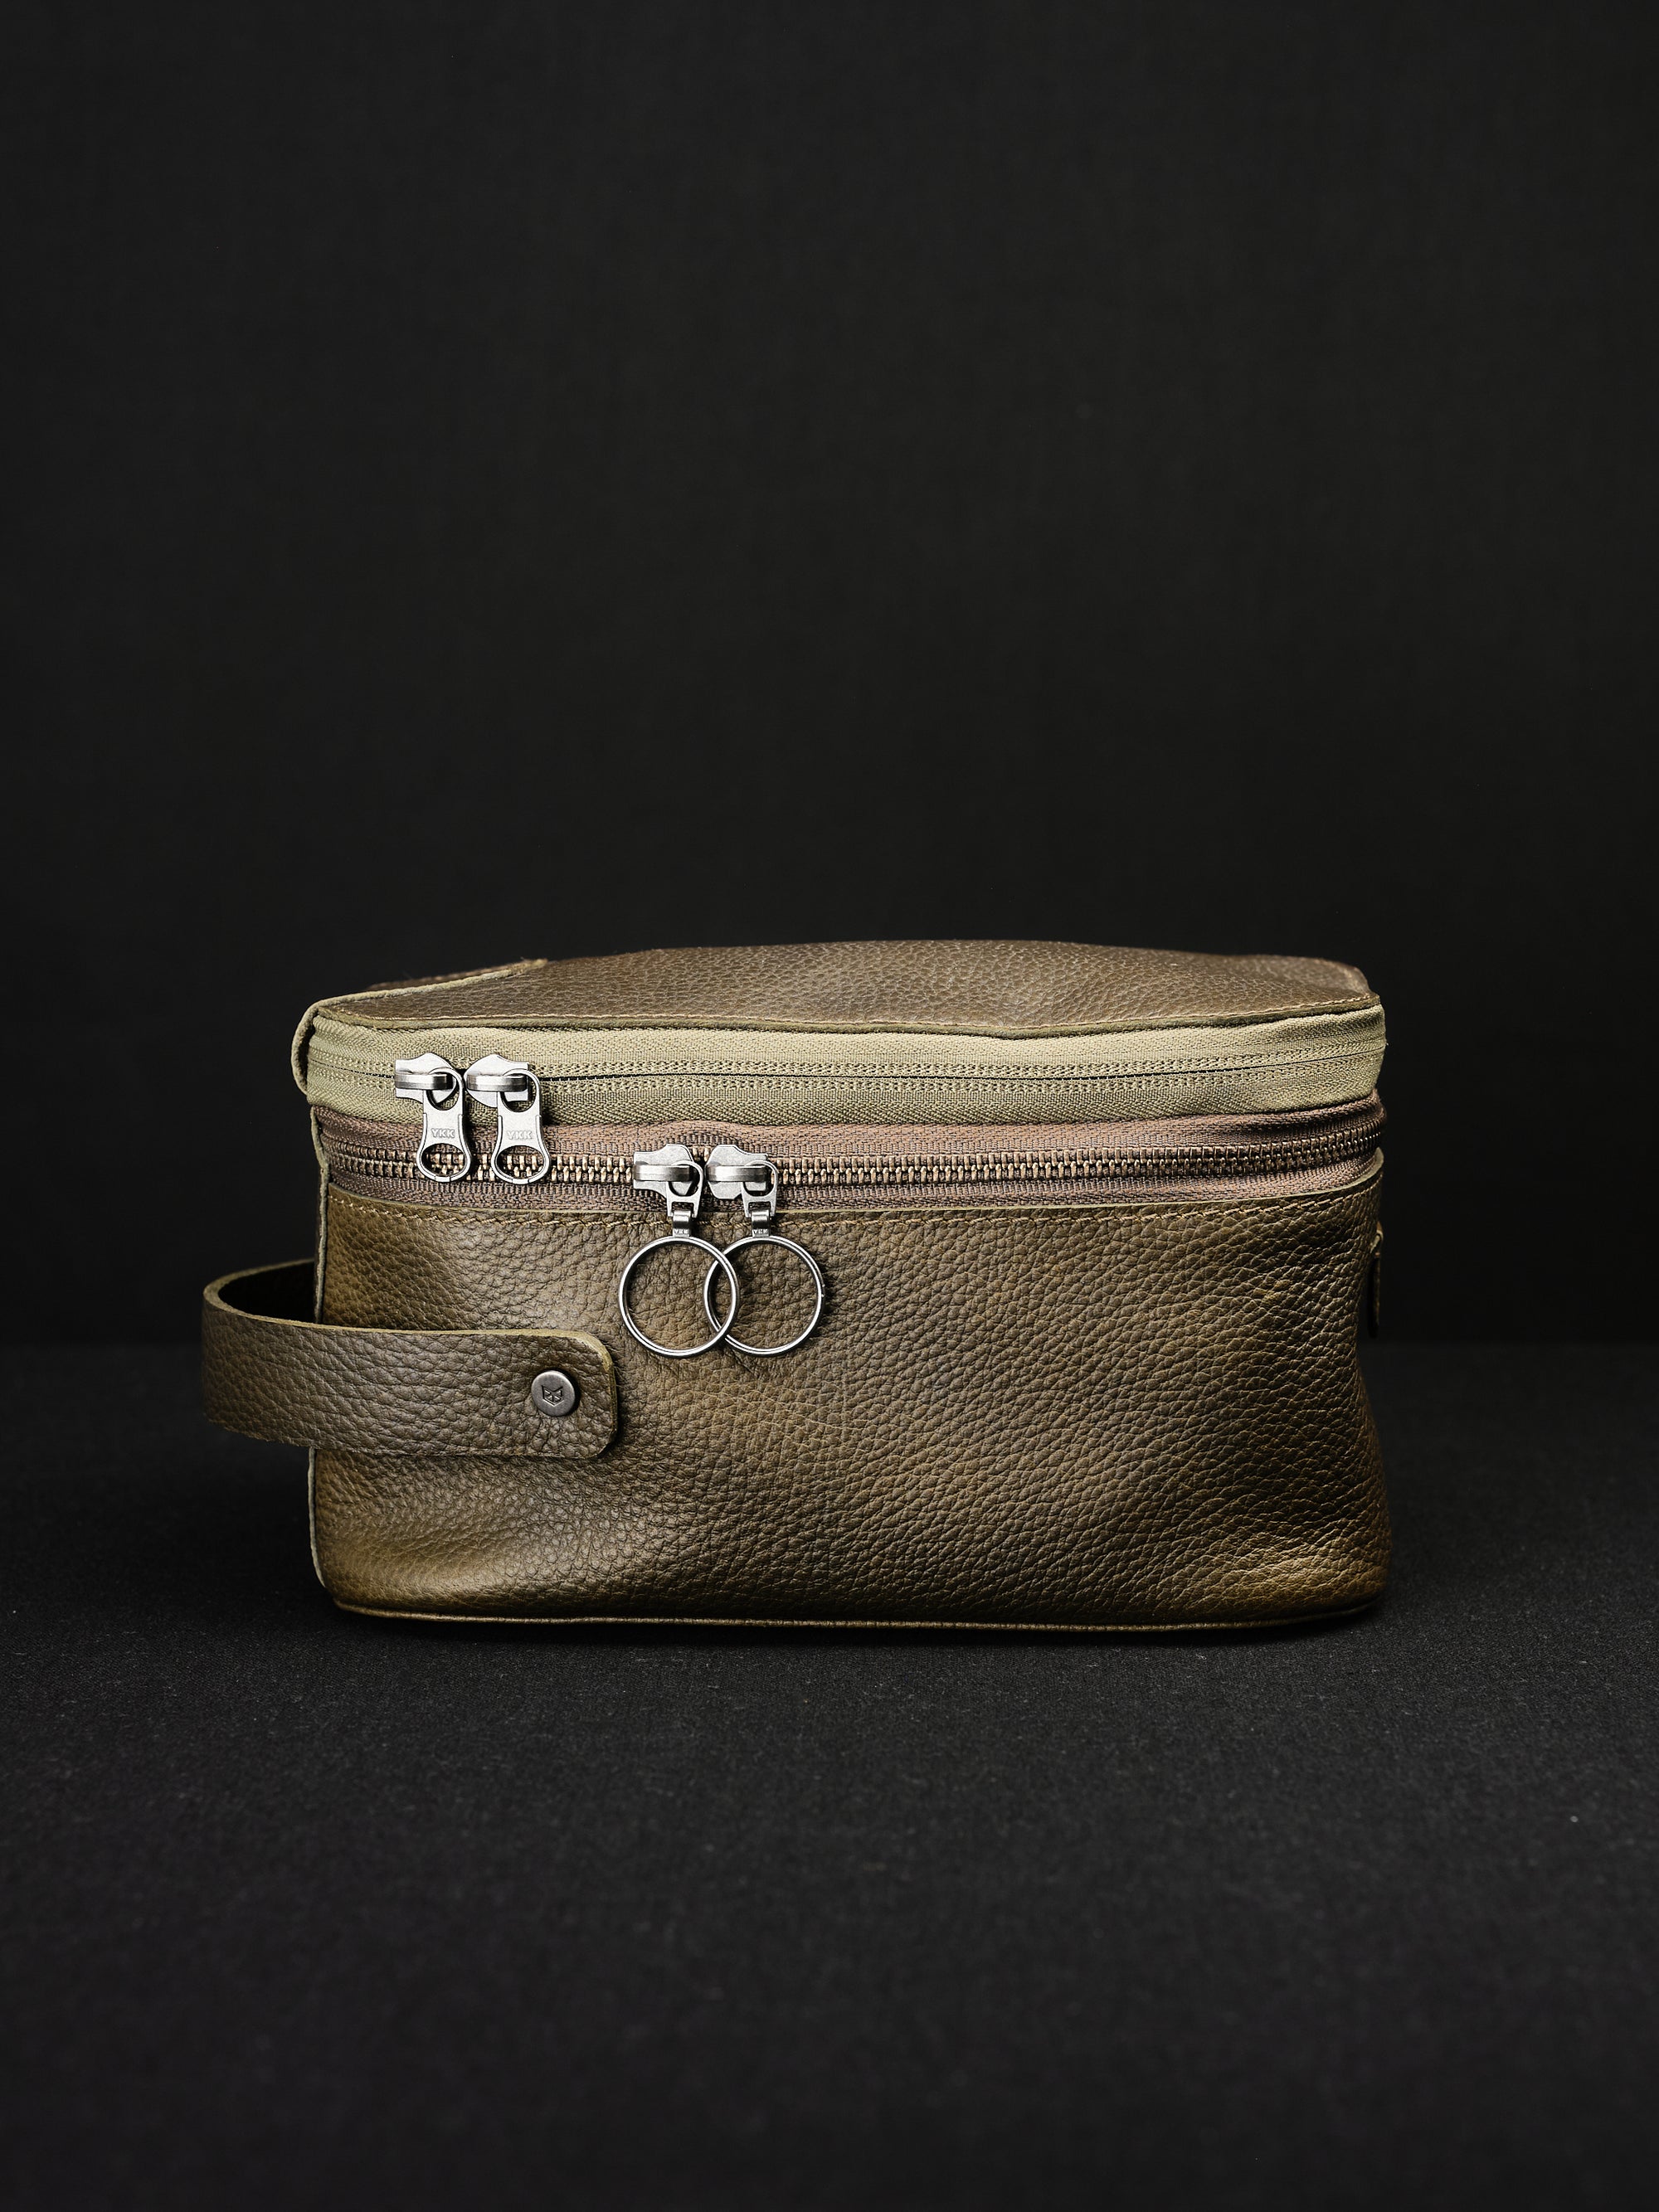 Personalized Toiletry Bag Green by Capra Leather